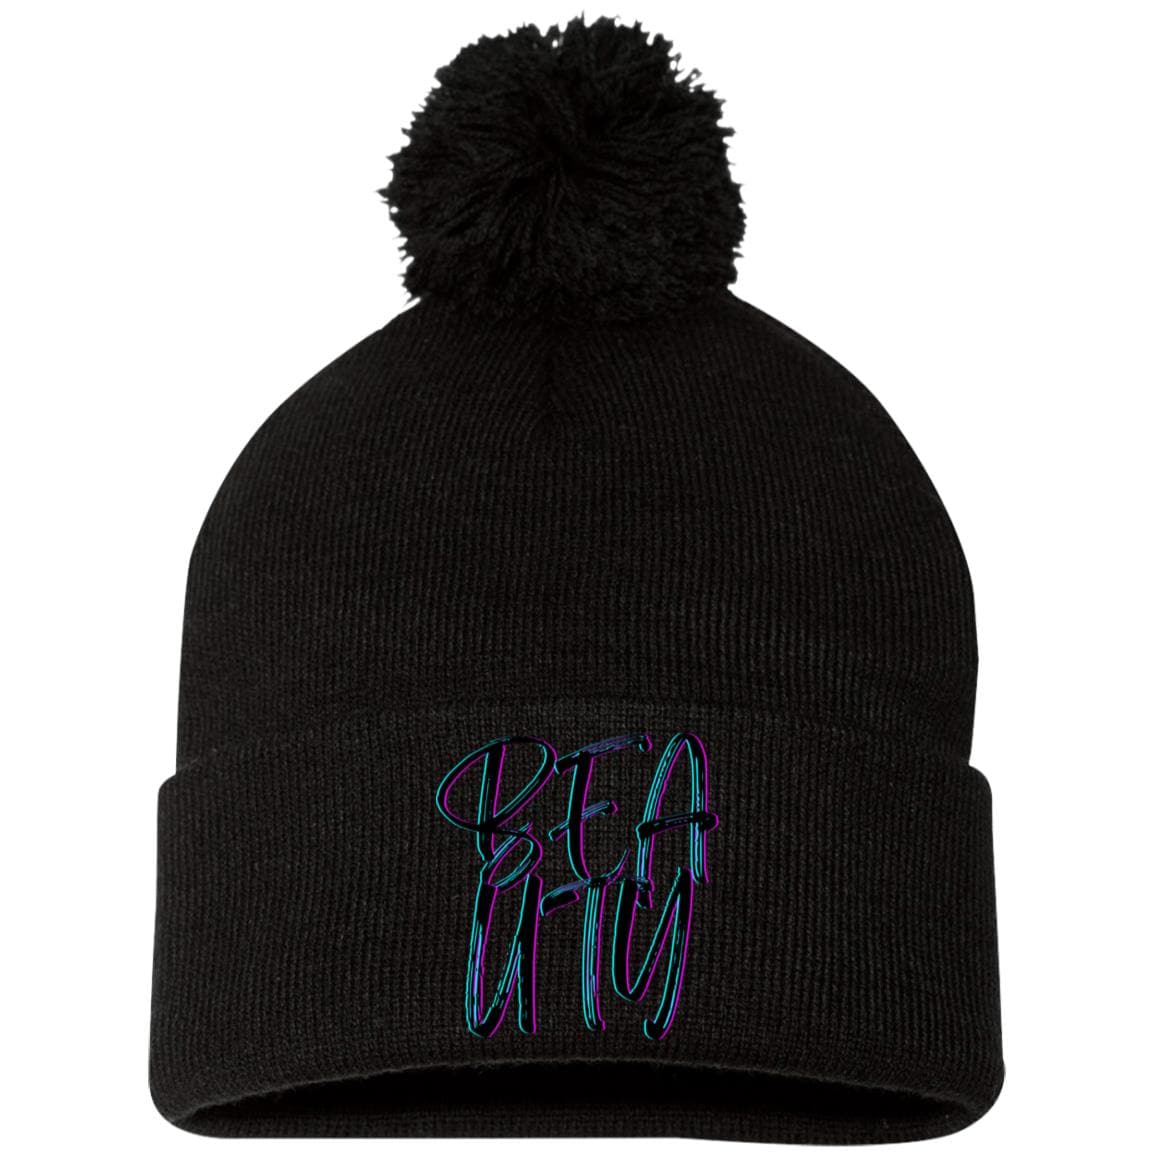 Black One Size - Beauty Embroidered Pom Pom Knit Cap - Hats at TFC&H Co.